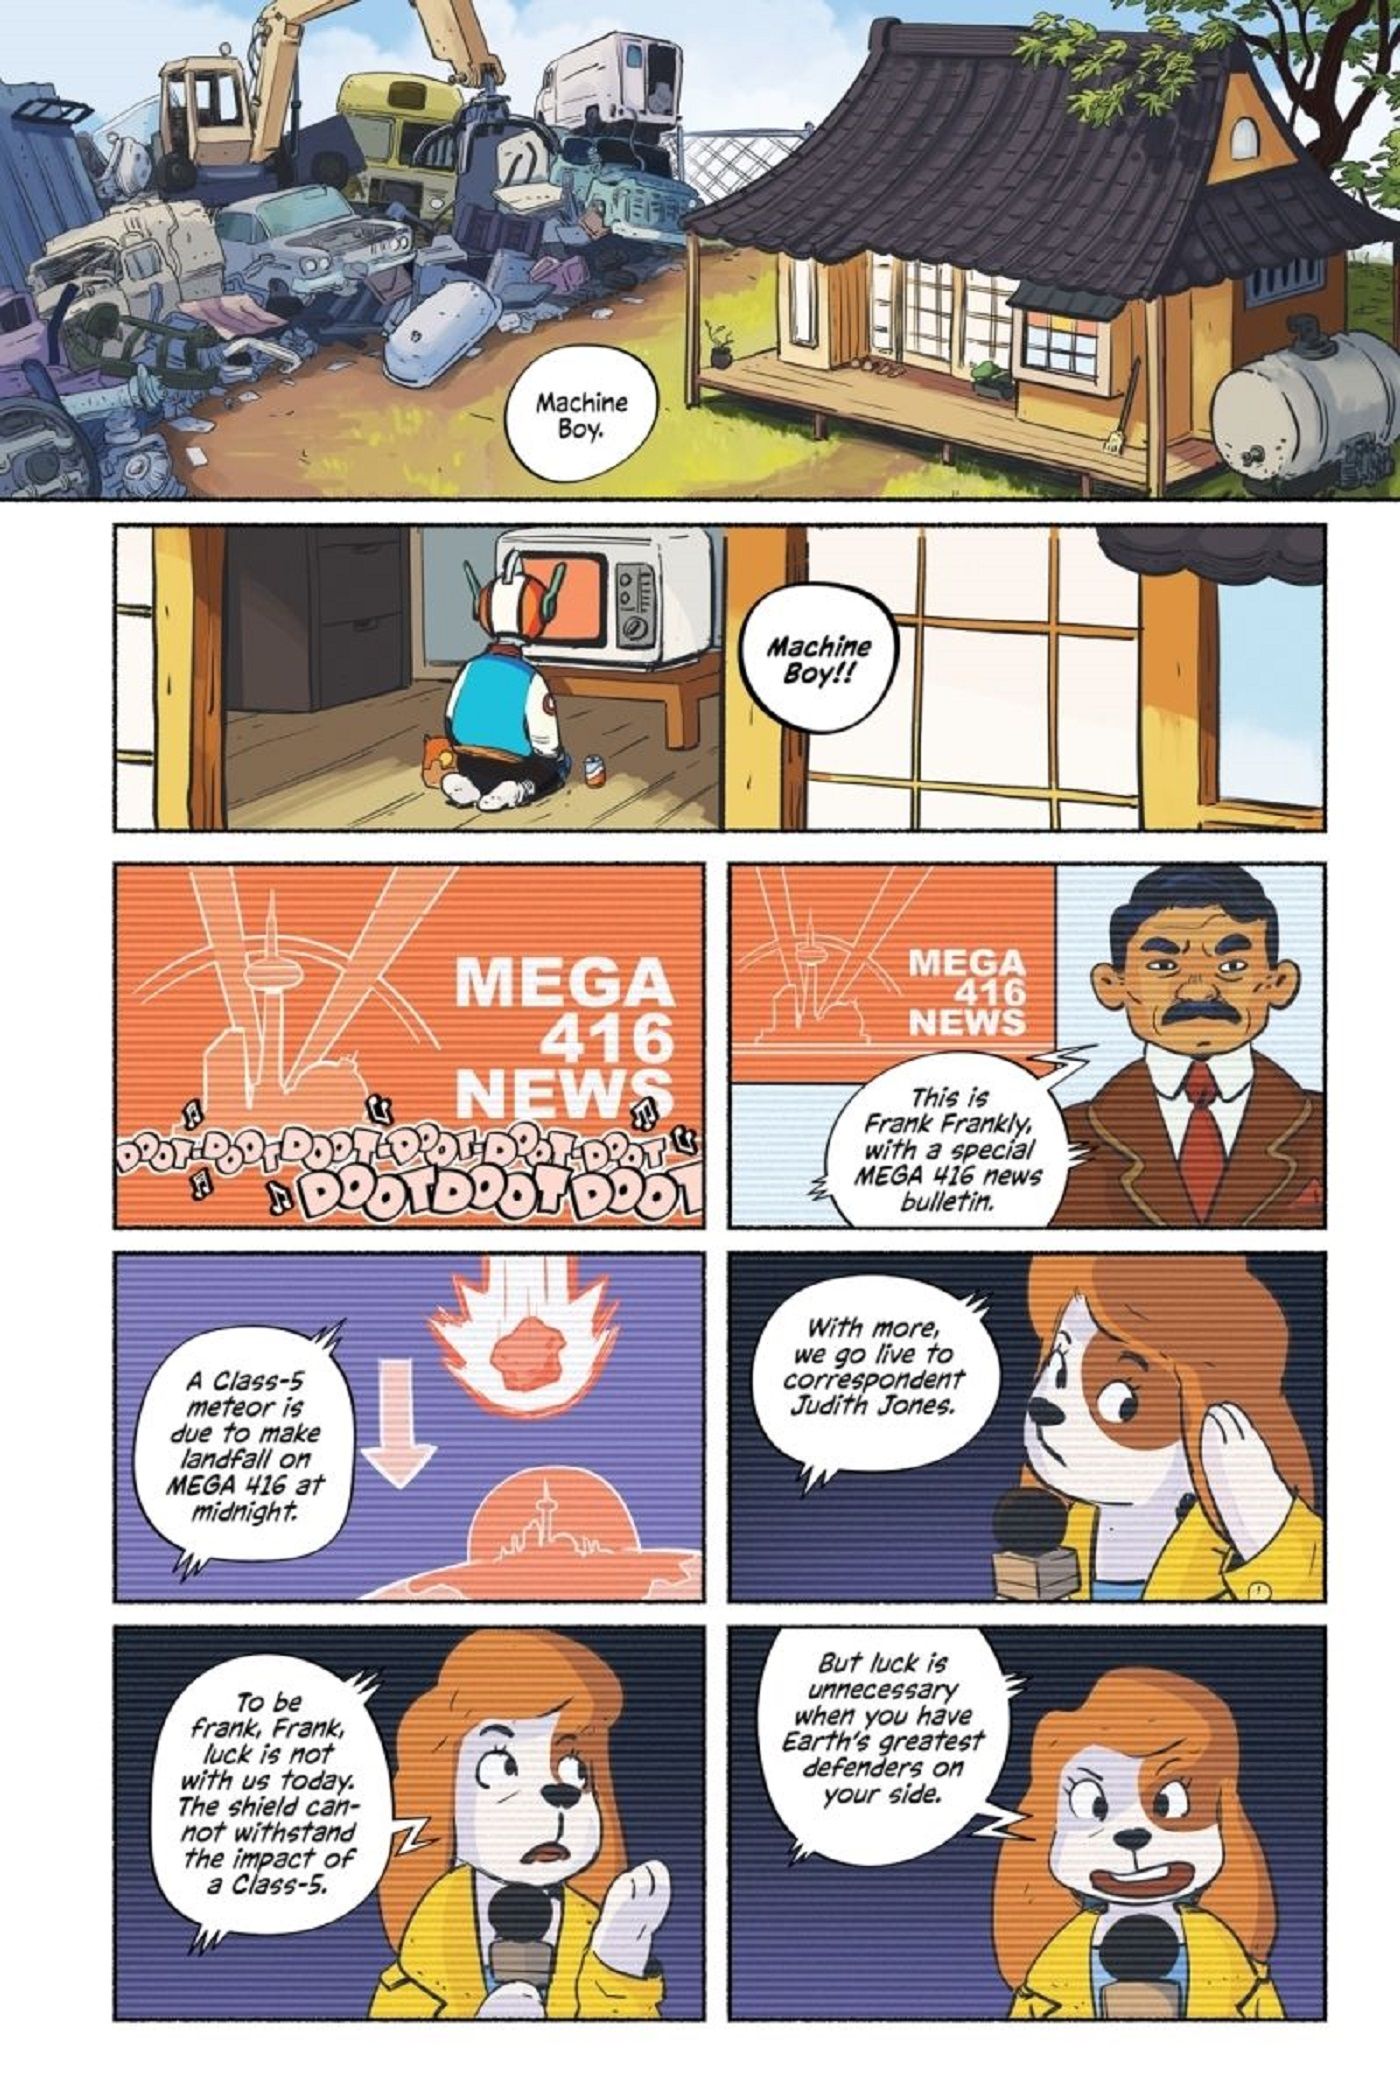 Everyday Hero Machine Boy OGN Preview Page 1